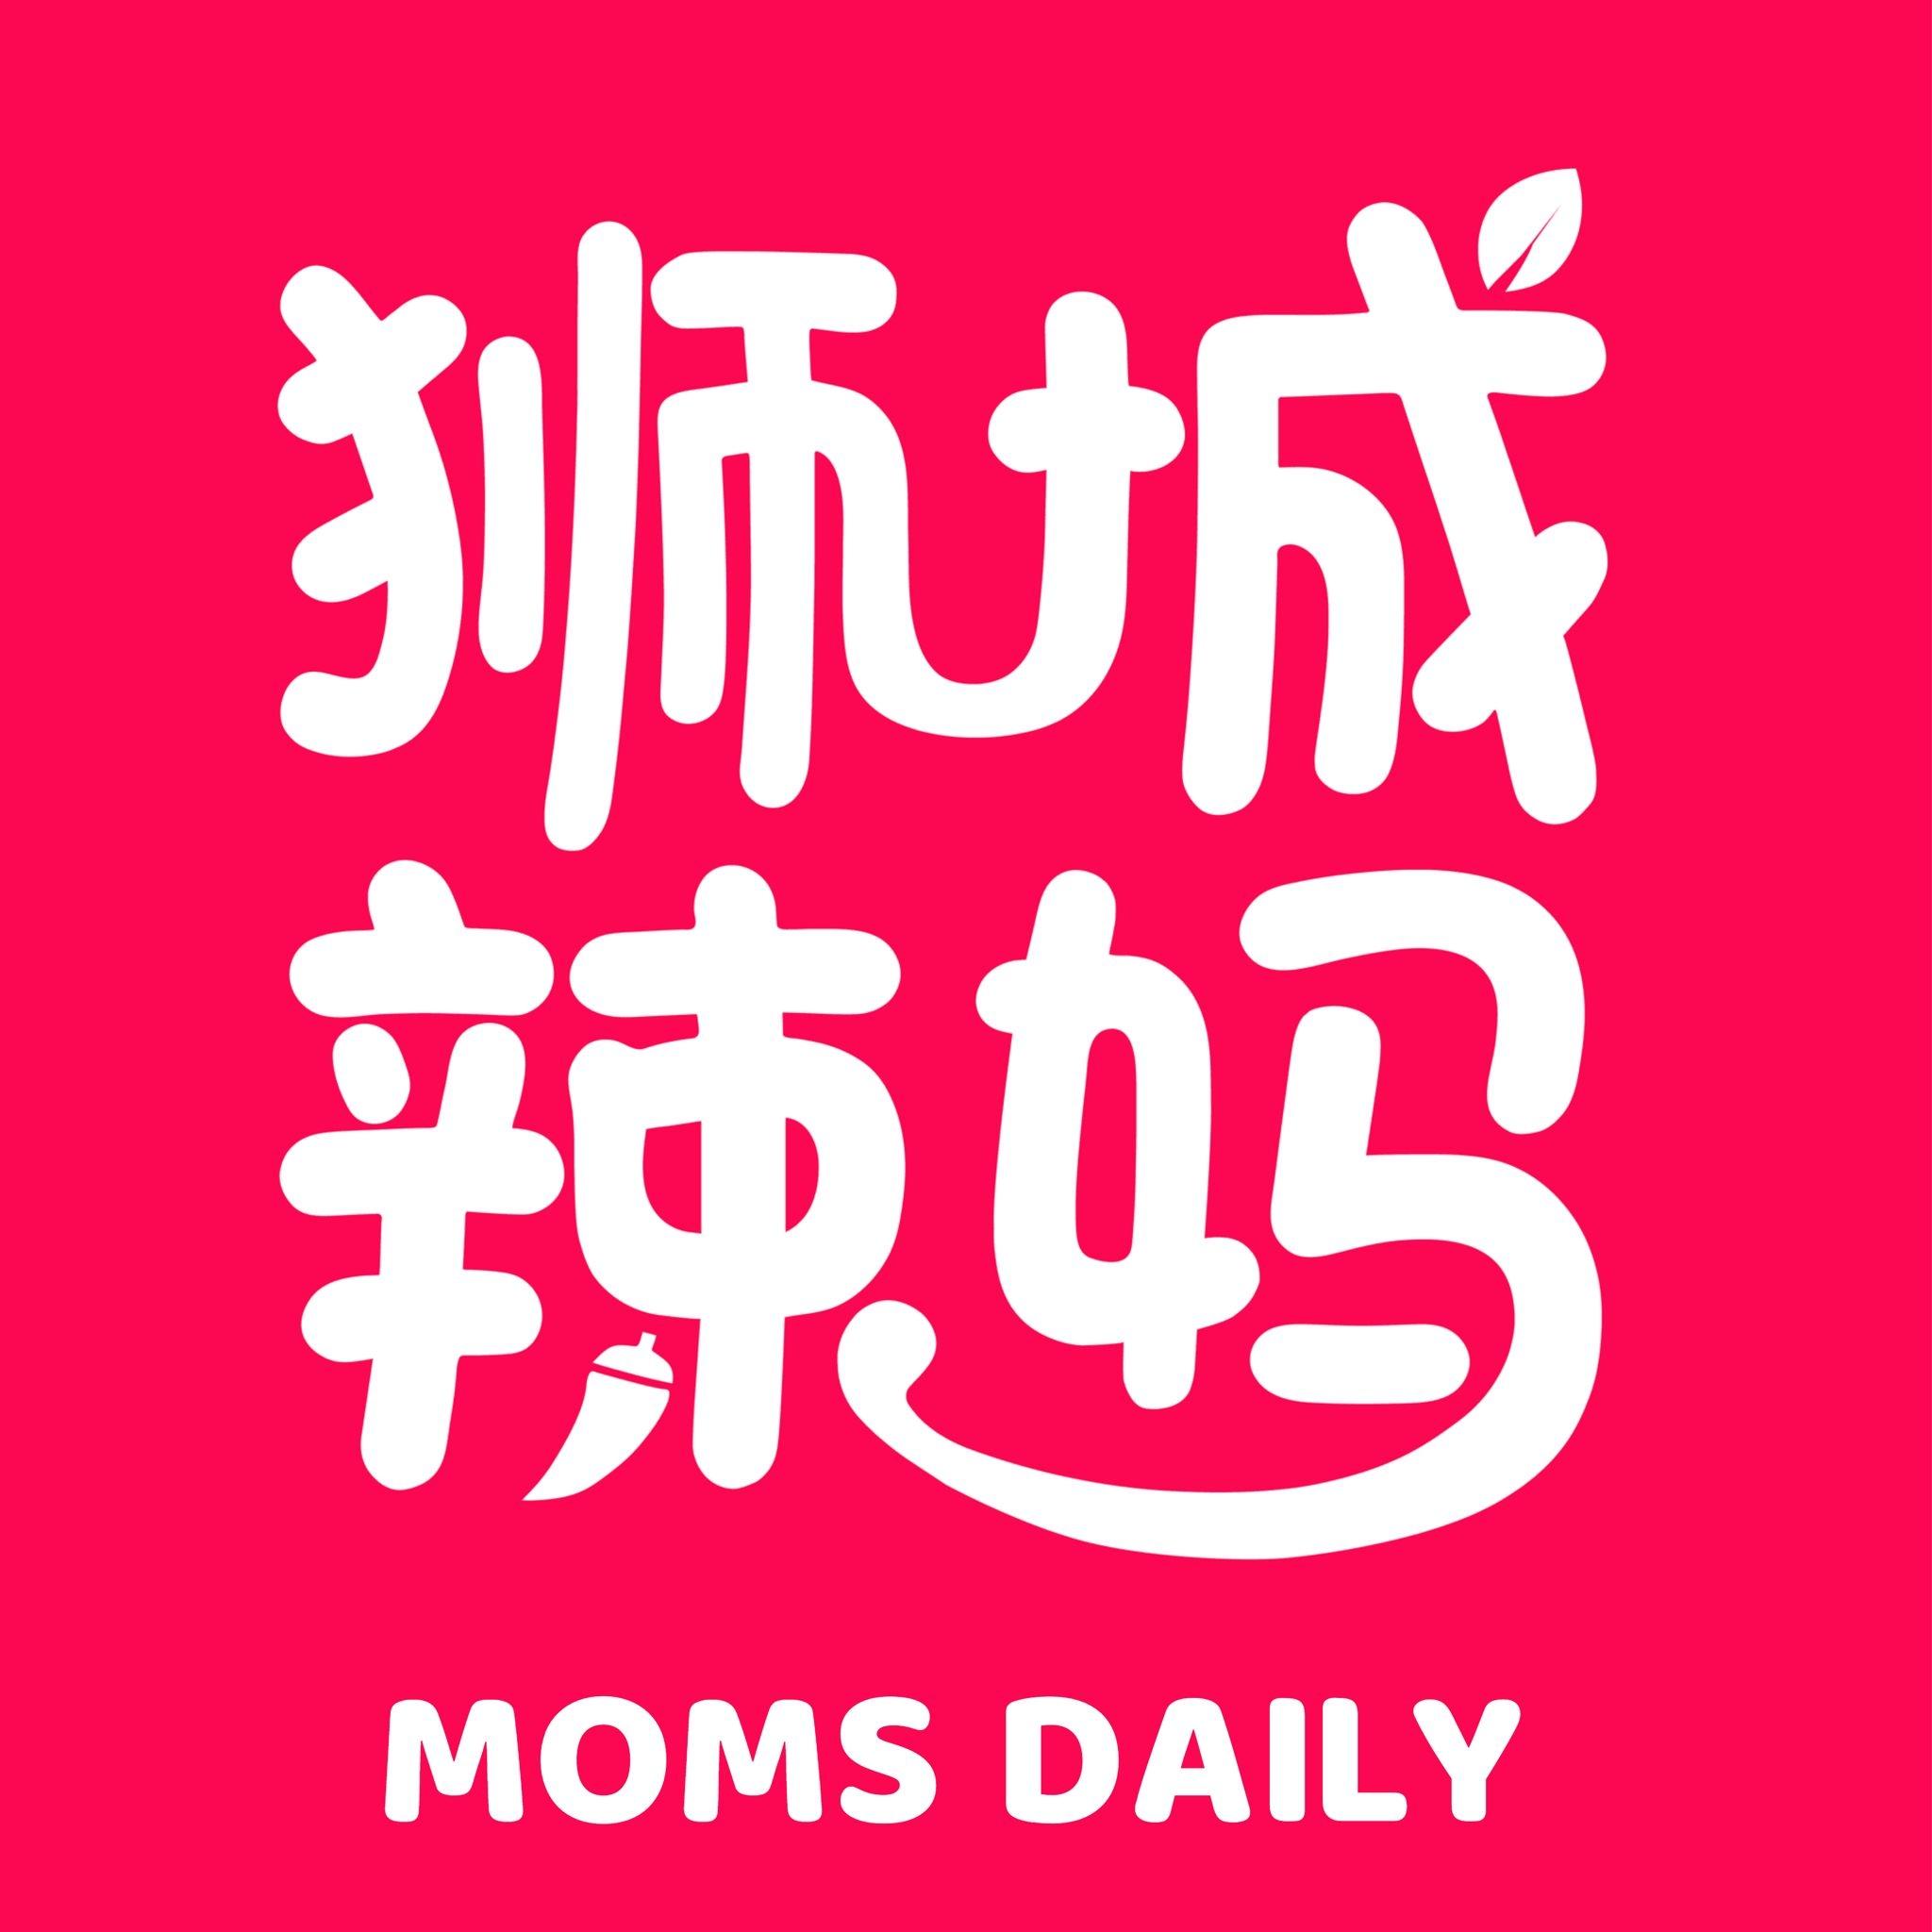 Moms Daily's images